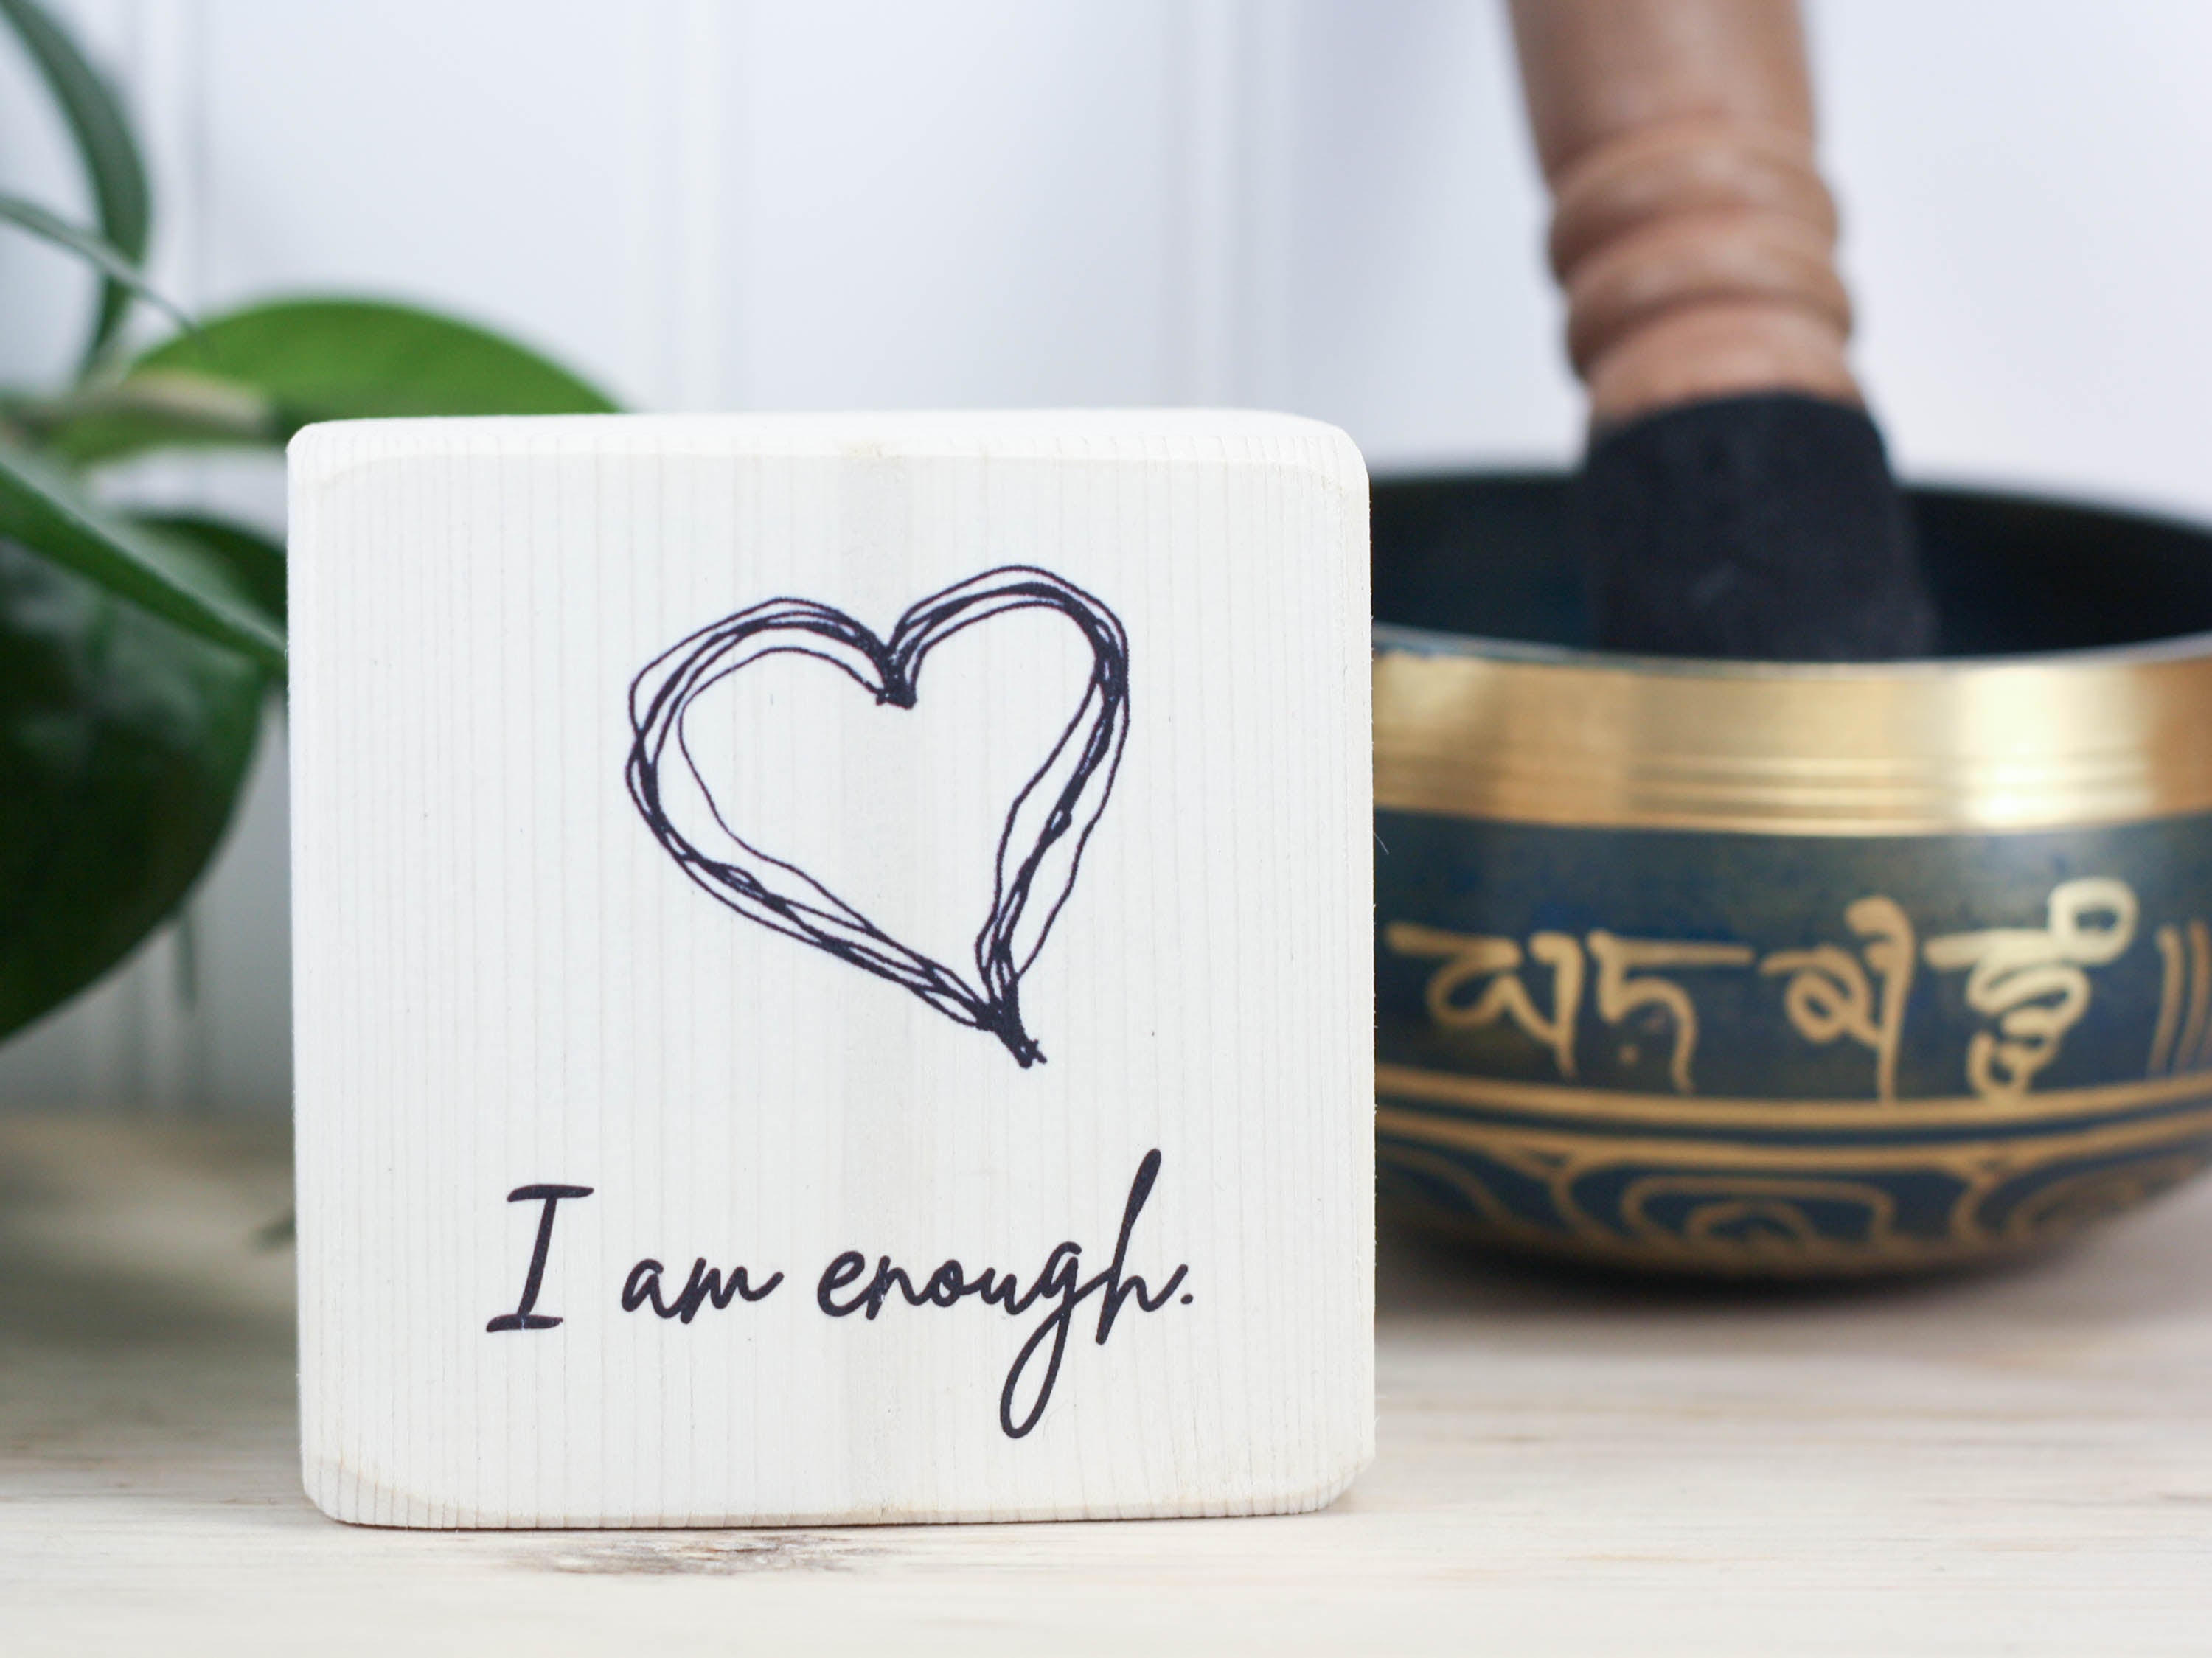 Small, freestanding, whitewash, solid wood sign with saying "I am enough".